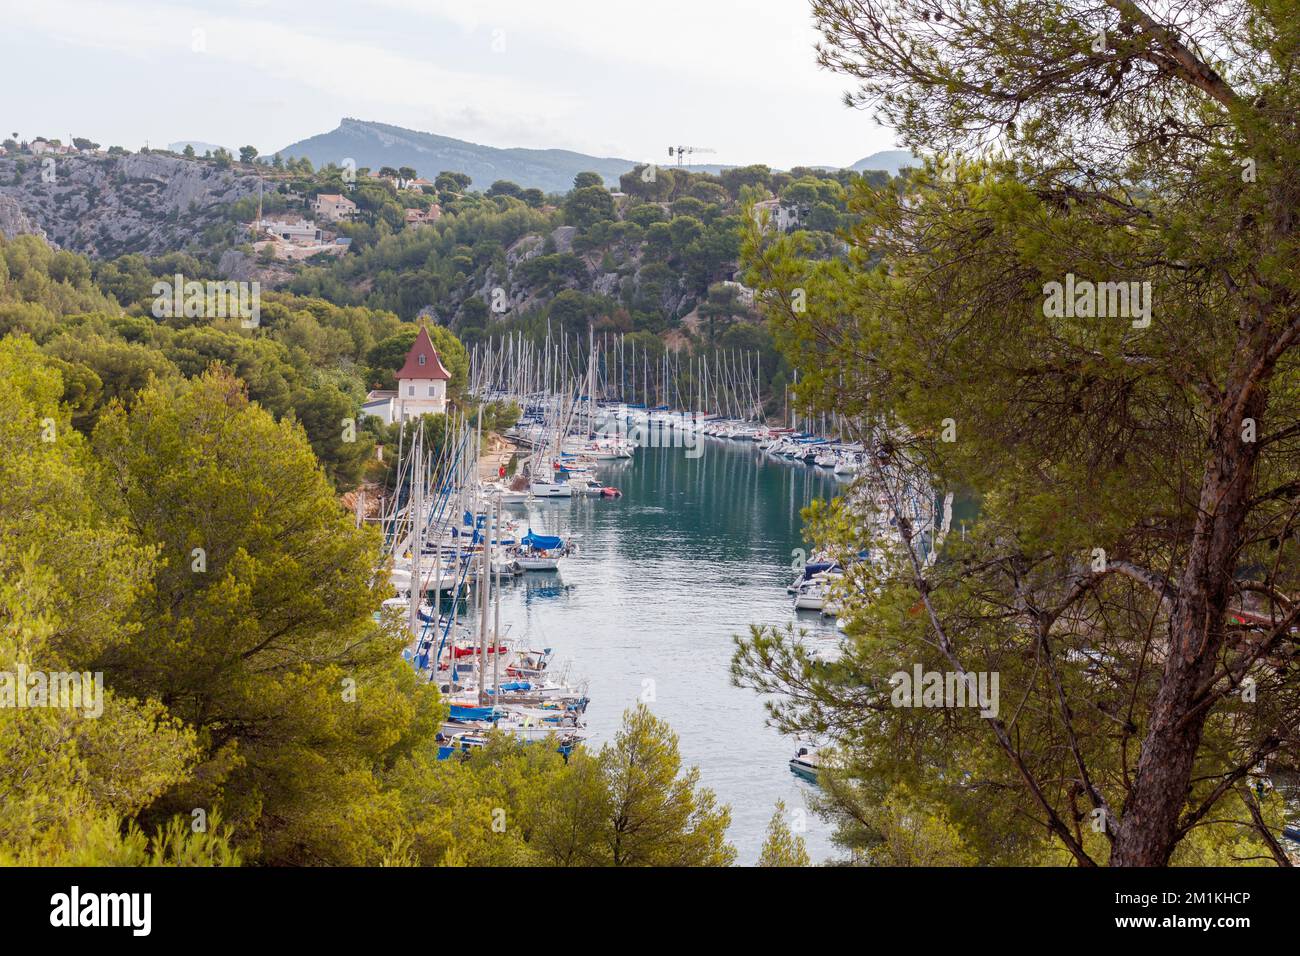 Port-Miou in Cassis France with ships and boats harbouring in blue ocean water. Stock Photo